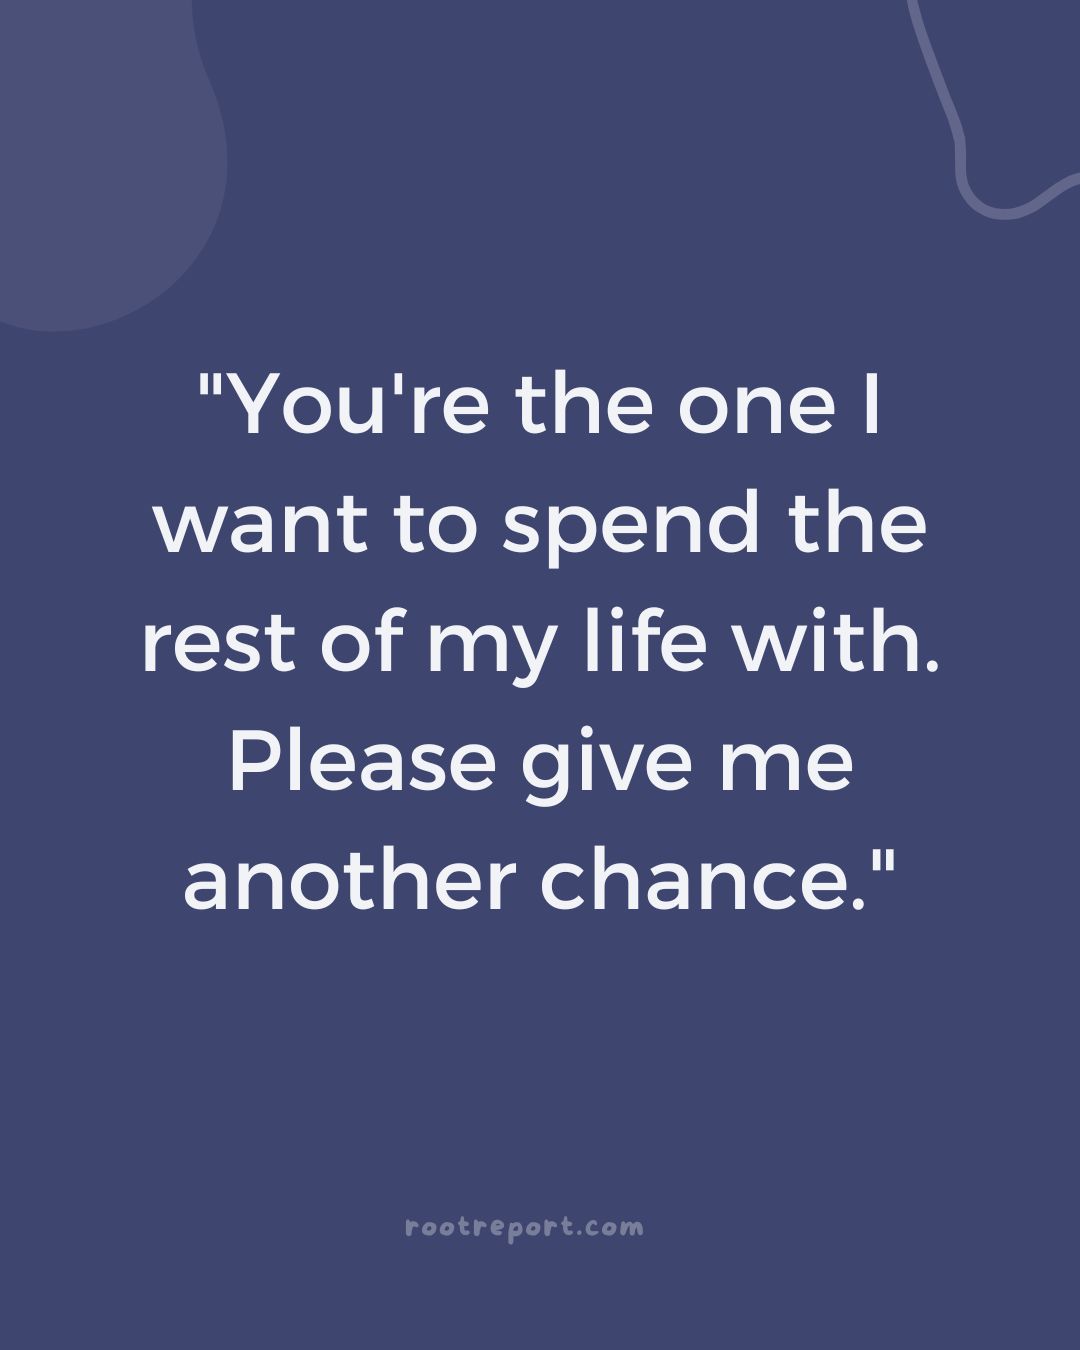 "You're the one I want to spend the rest of my life with. Please give me another chance."